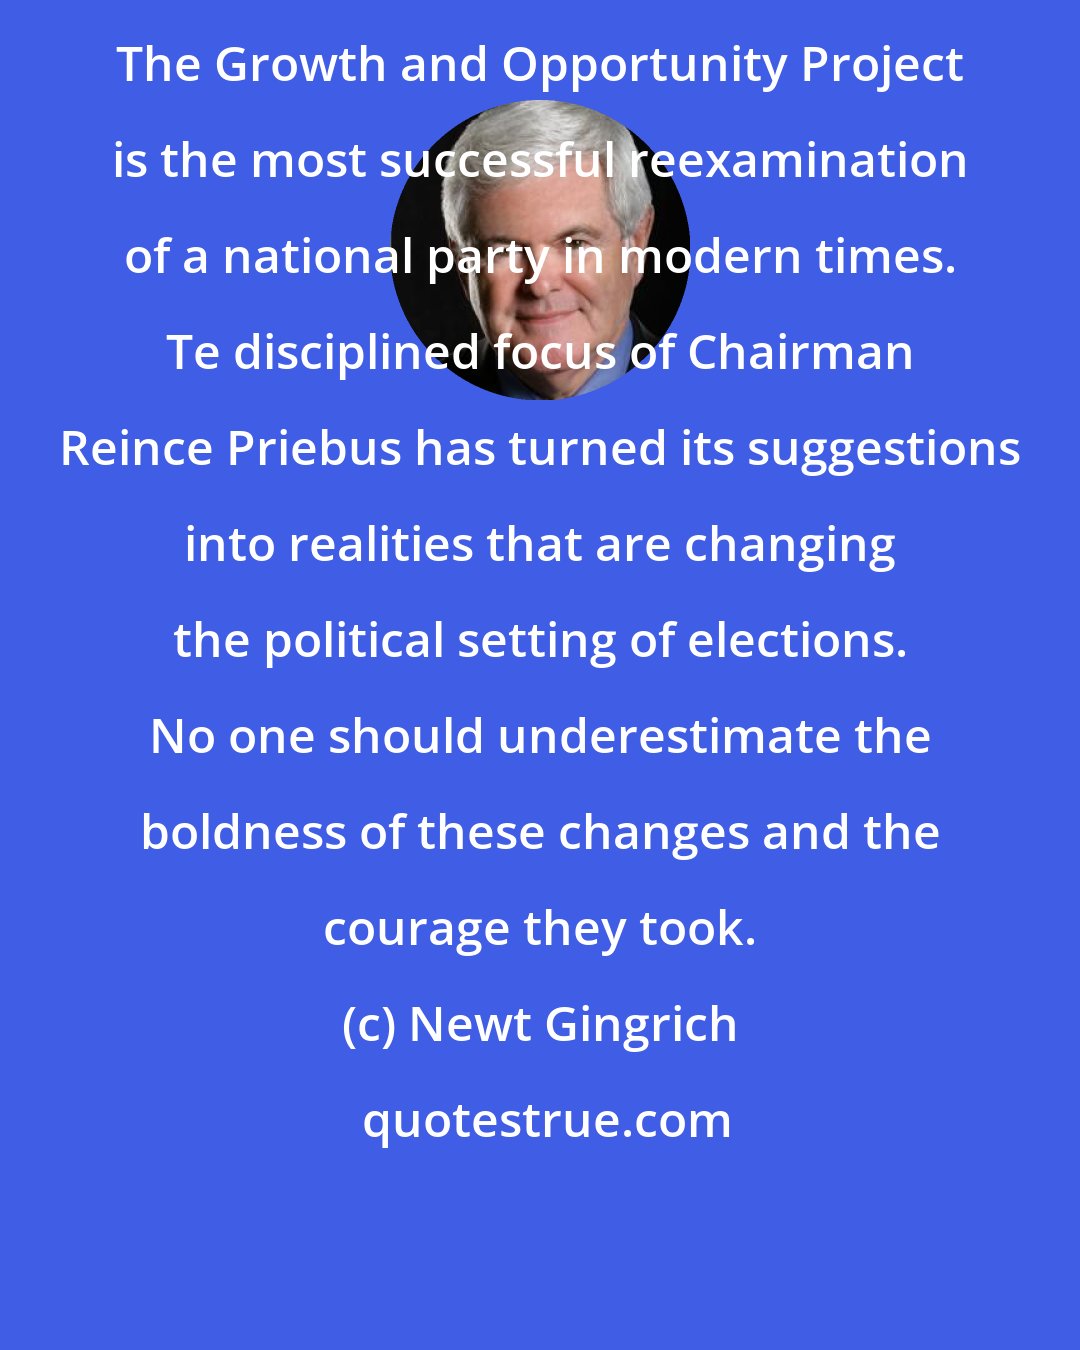 Newt Gingrich: The Growth and Opportunity Project is the most successful reexamination of a national party in modern times. Te disciplined focus of Chairman Reince Priebus has turned its suggestions into realities that are changing the political setting of elections. No one should underestimate the boldness of these changes and the courage they took.